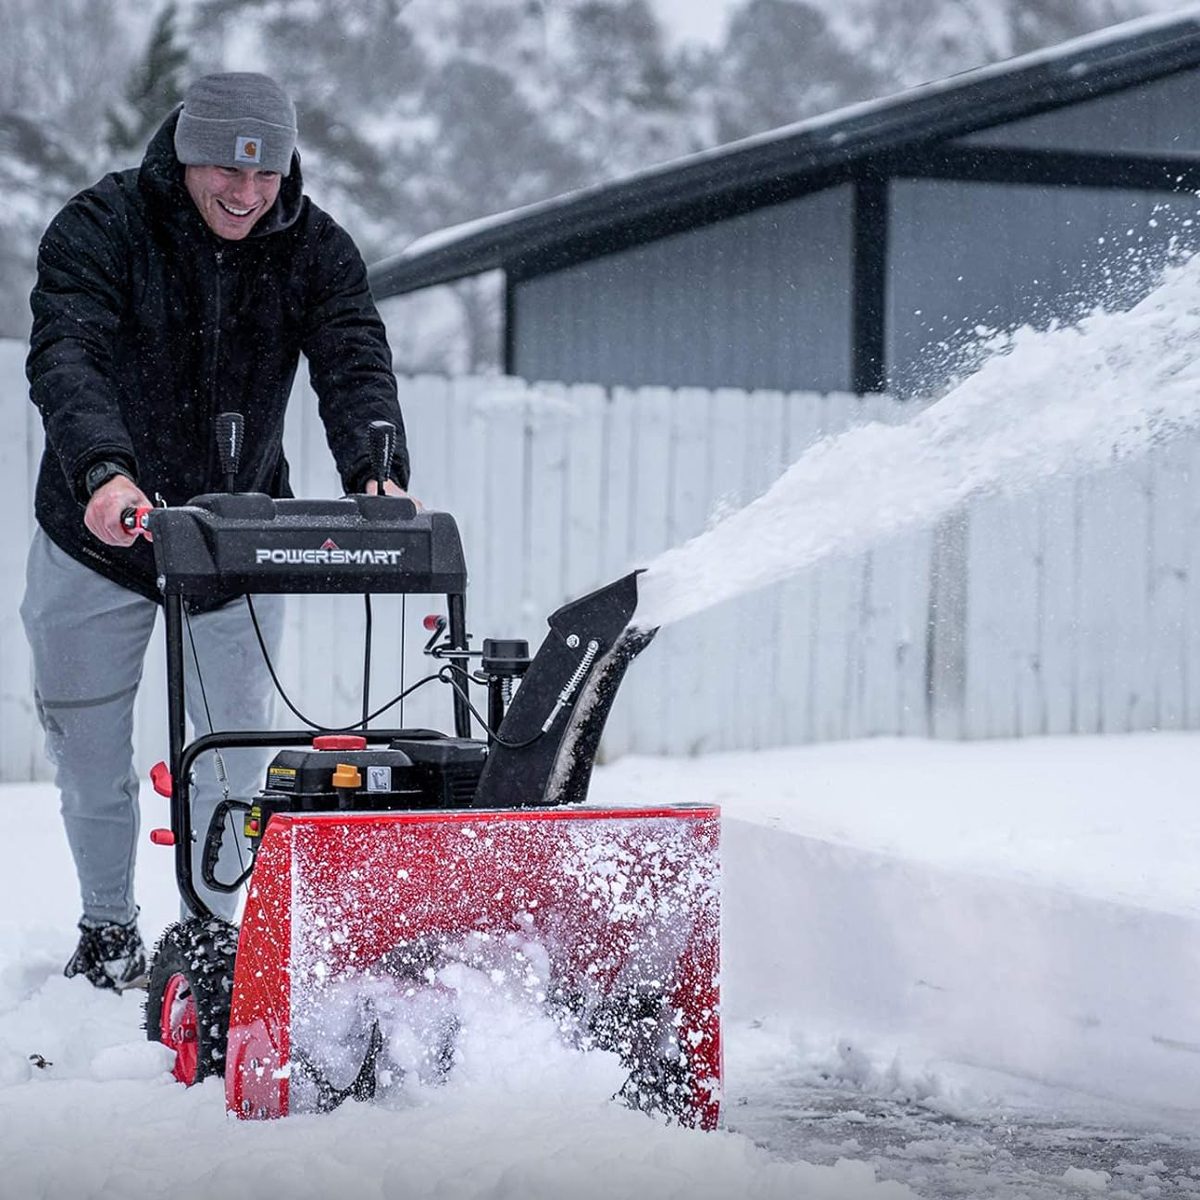 Best-Reviewed Snow Blowers, According to Amazon